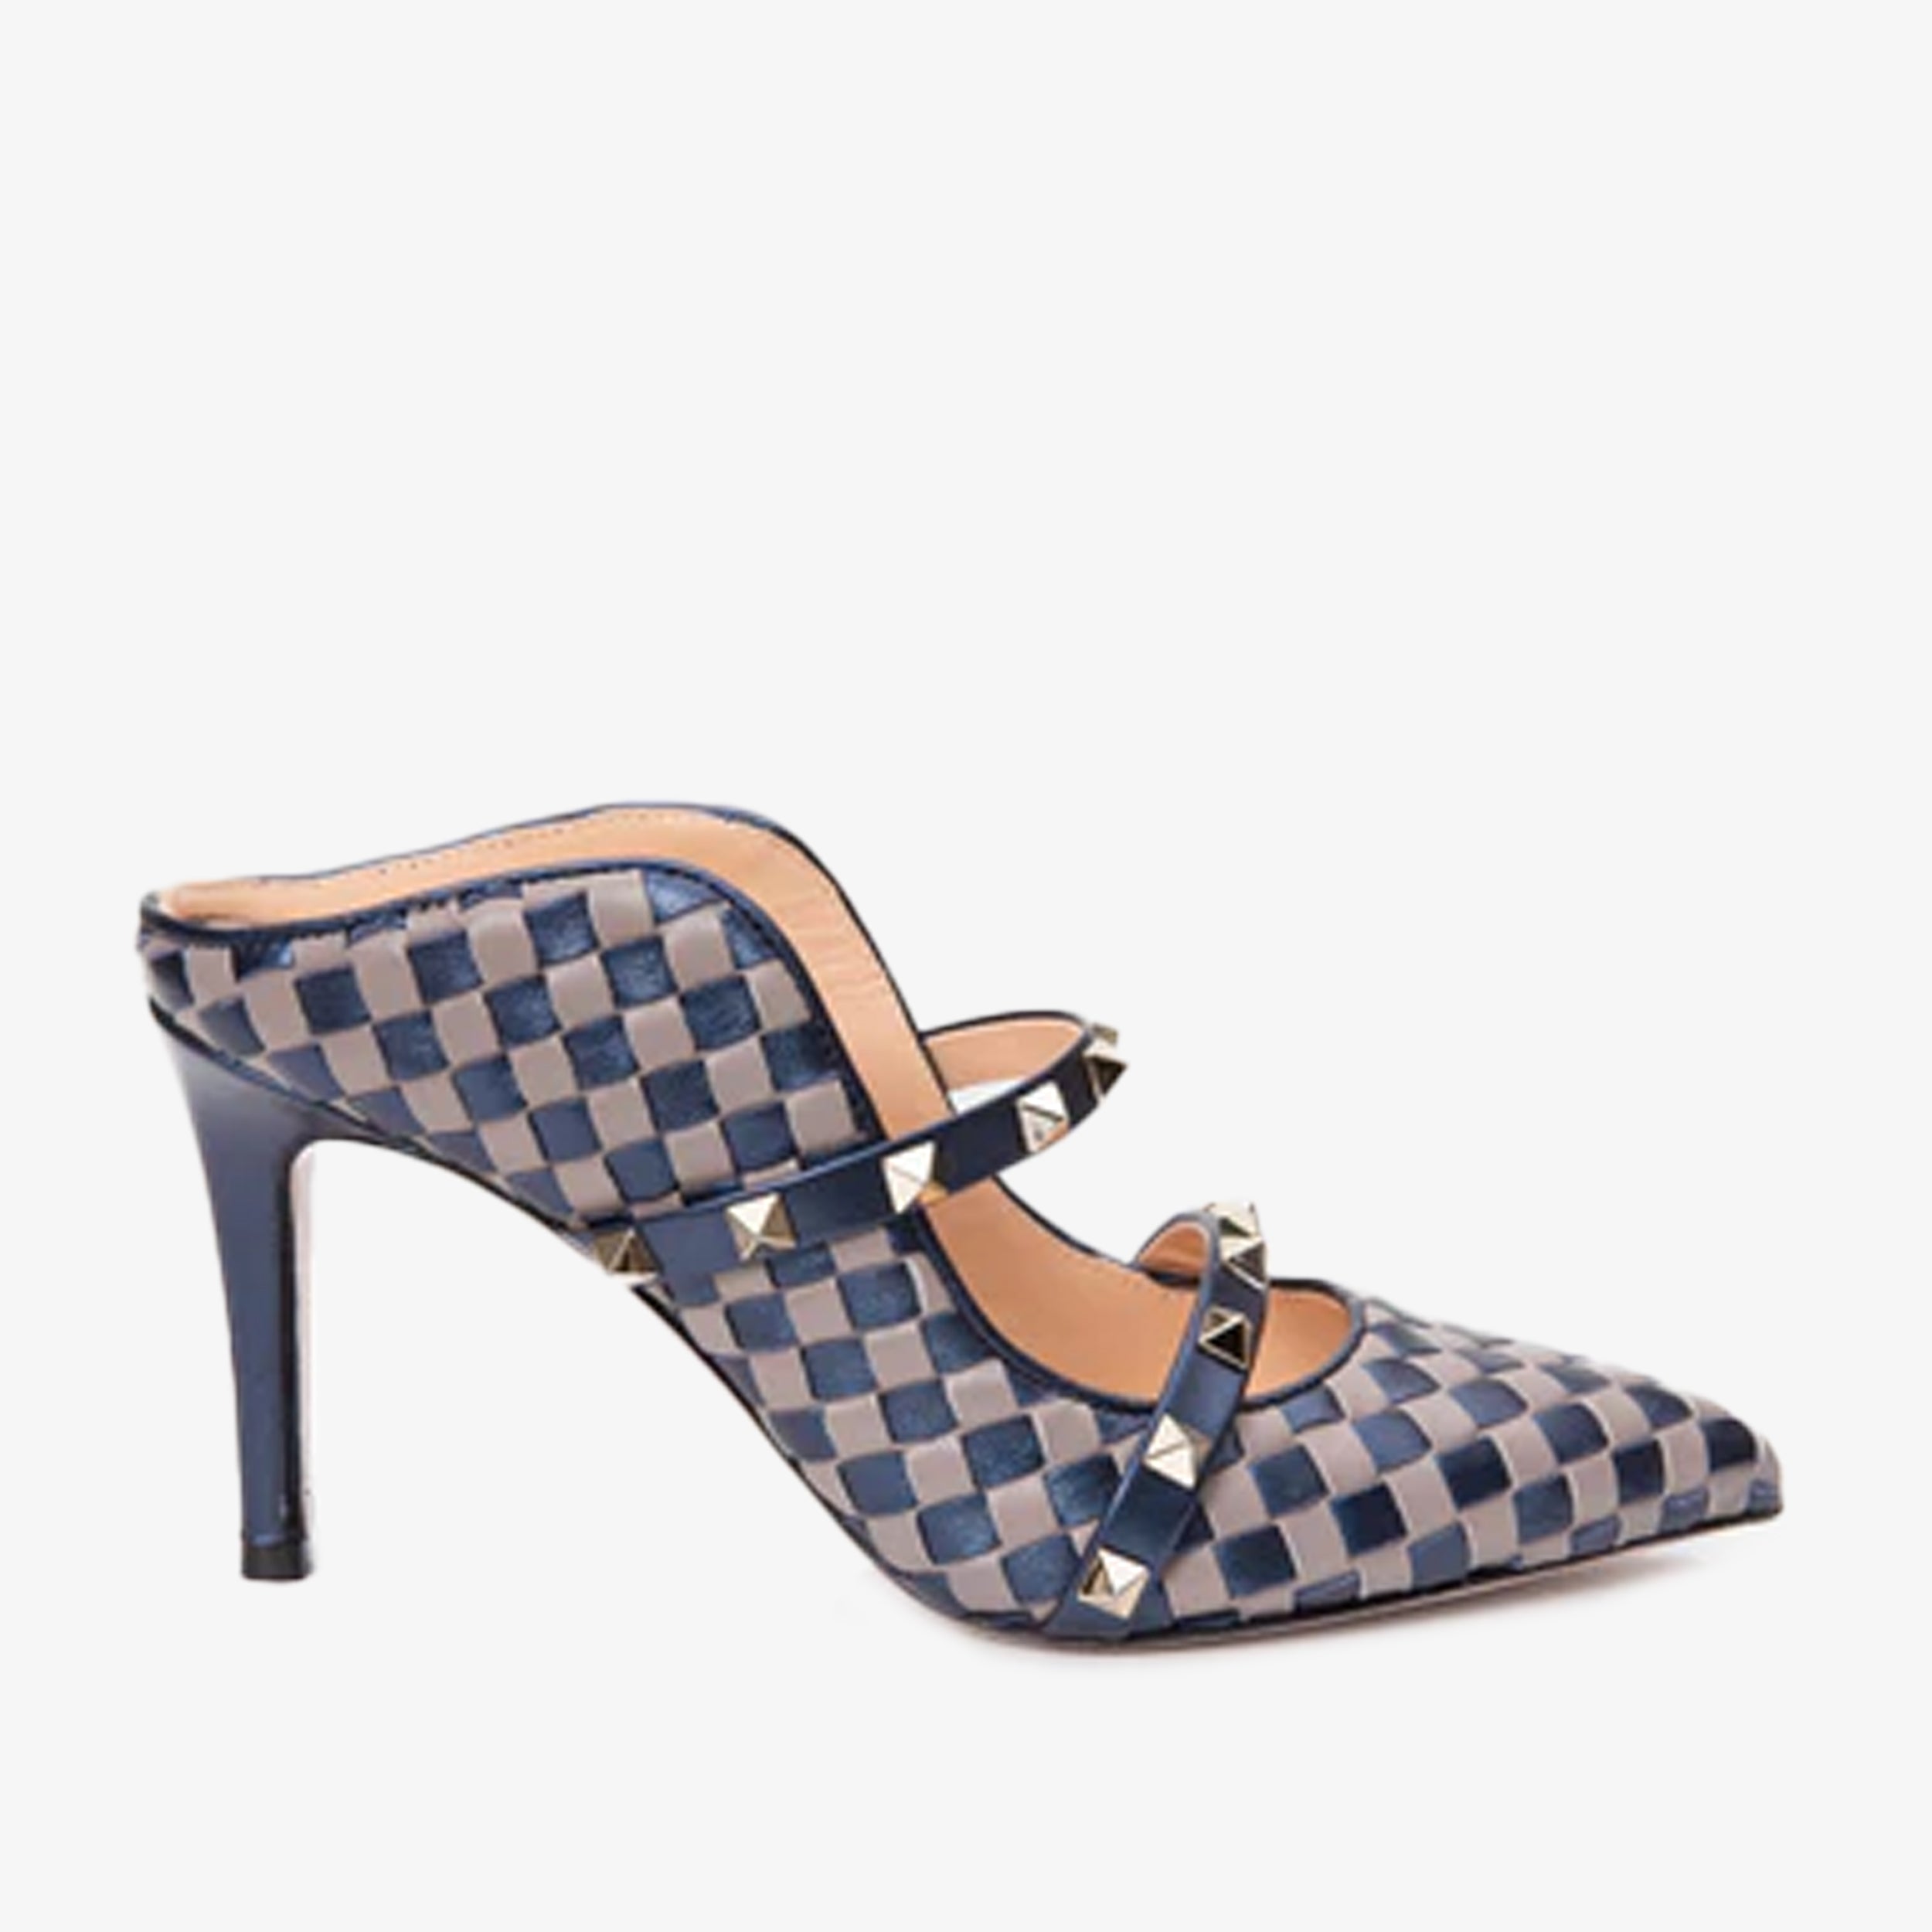 The Dosso Navy Blue Handwoven Pointy Toe Leather Women Sandal